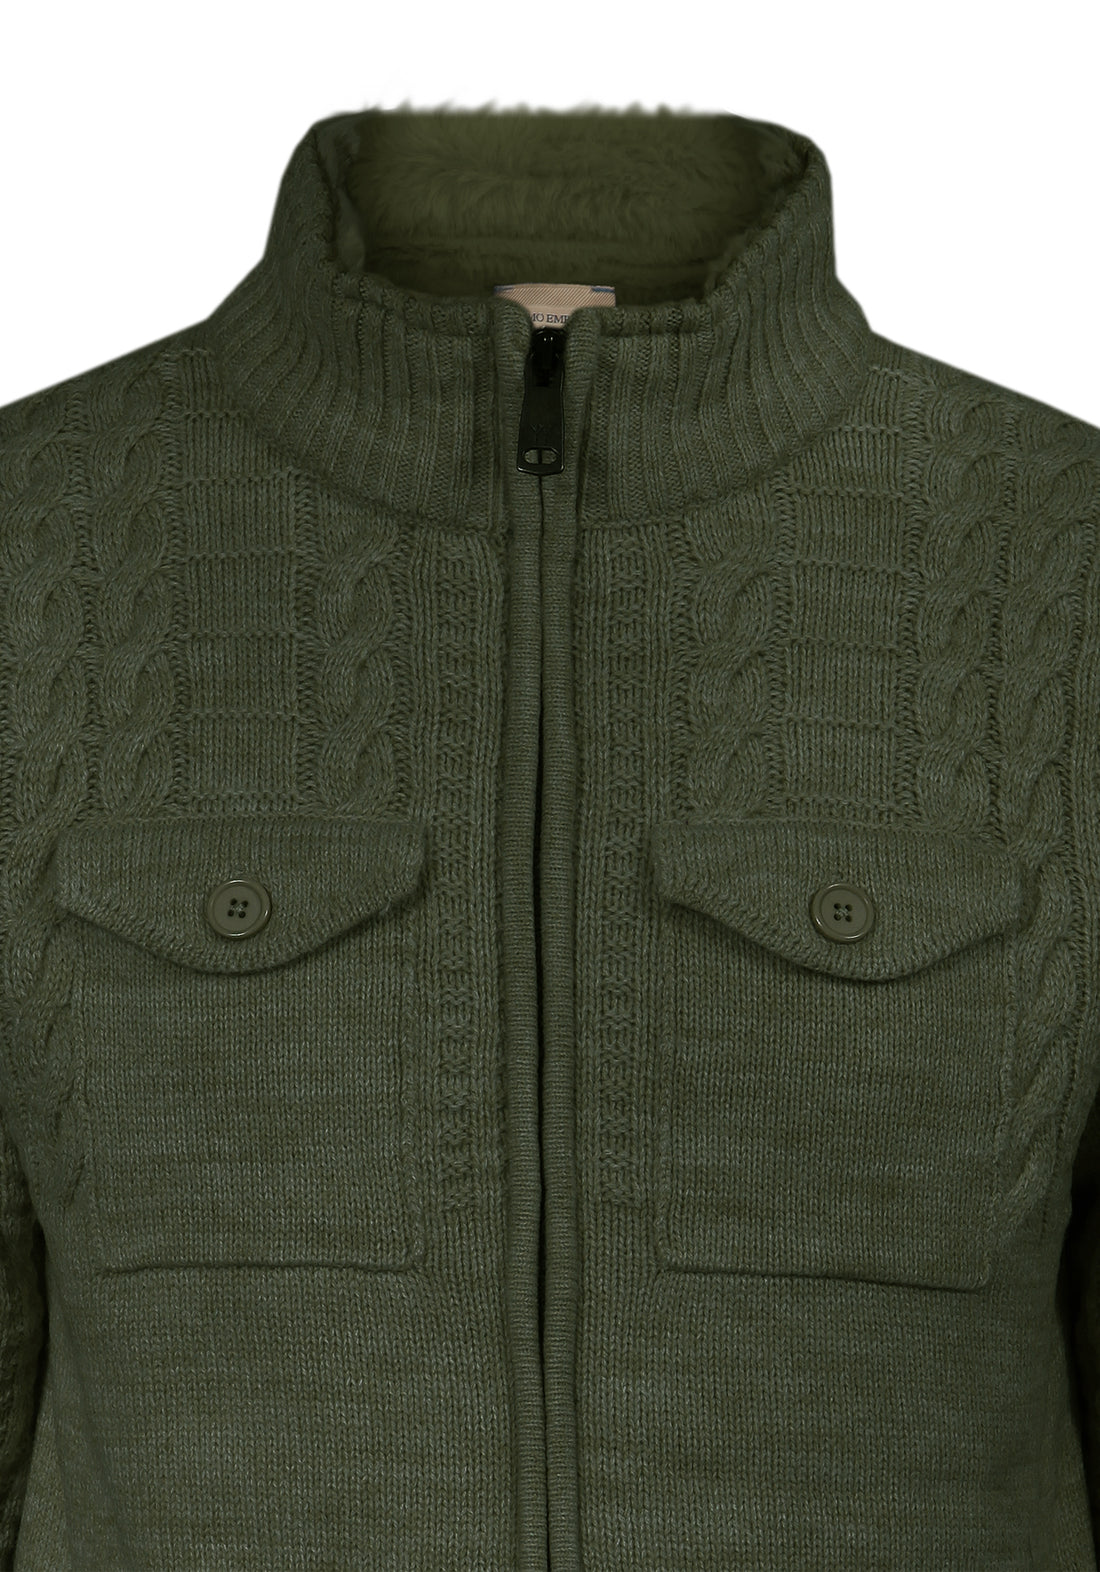 Sweater with two internal pockets in fur - Military -